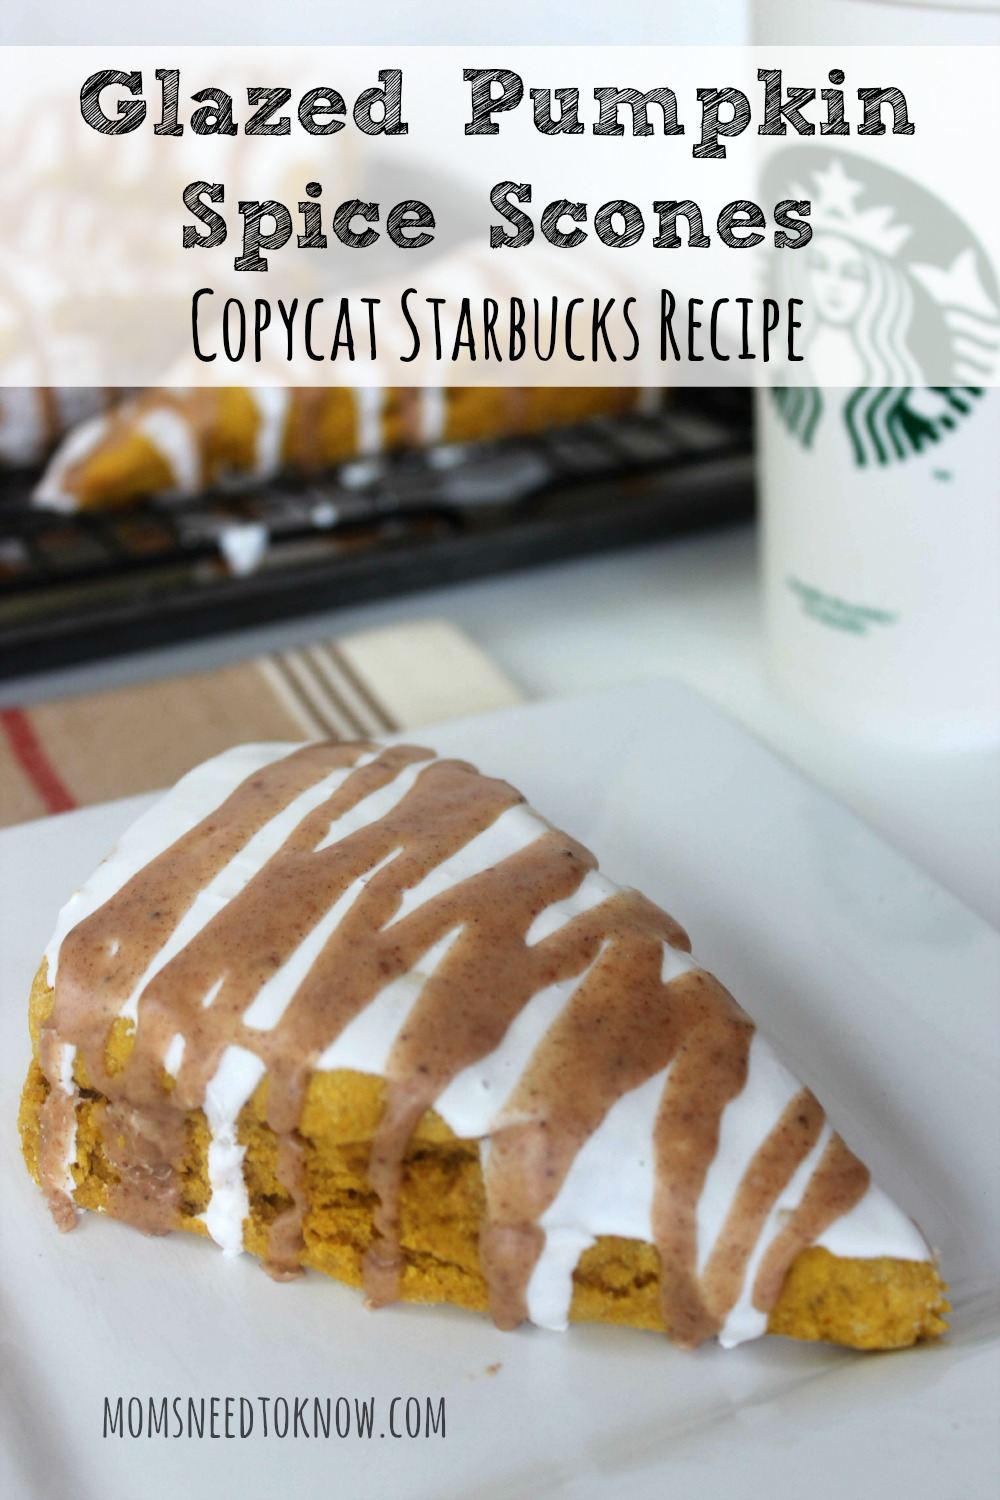 While I love the Pumpkin Spice Scone at Starbucks, for the price of just a single scone, you can make a whole batch of 8 of them with this recipe!